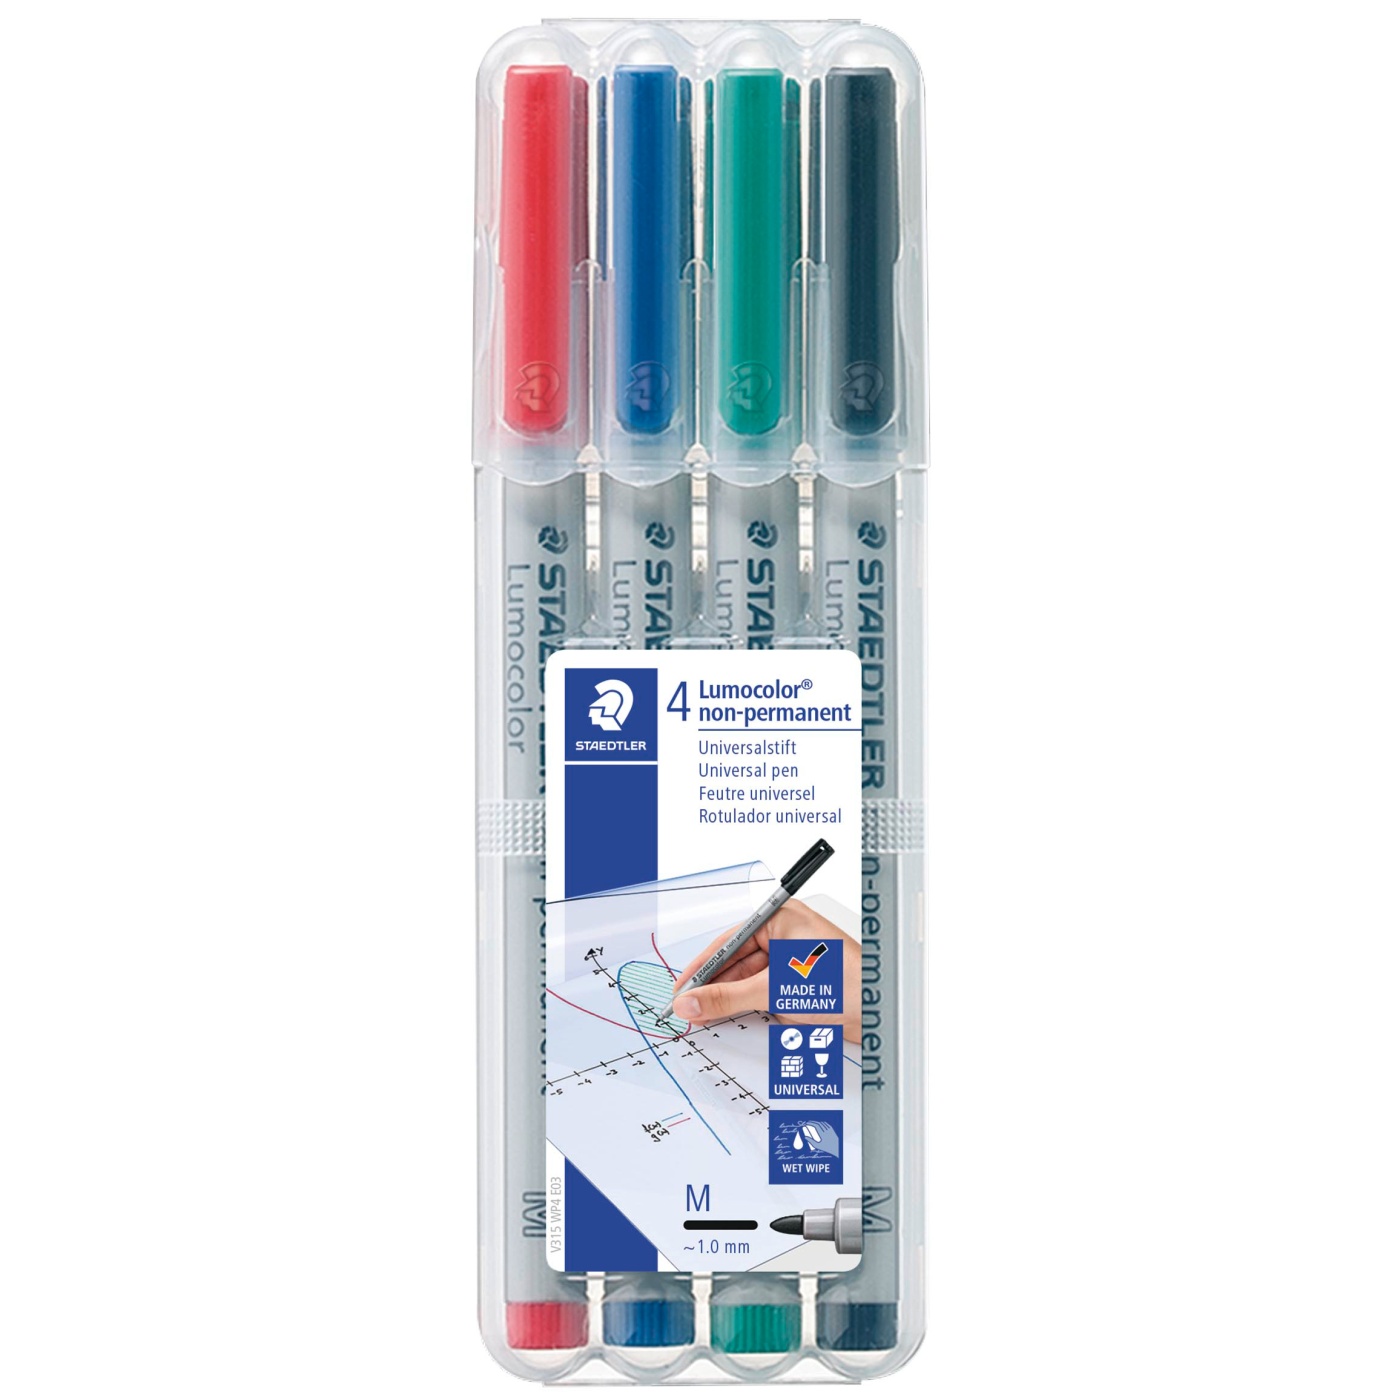 Paint Marker PX-30 White 12-pack